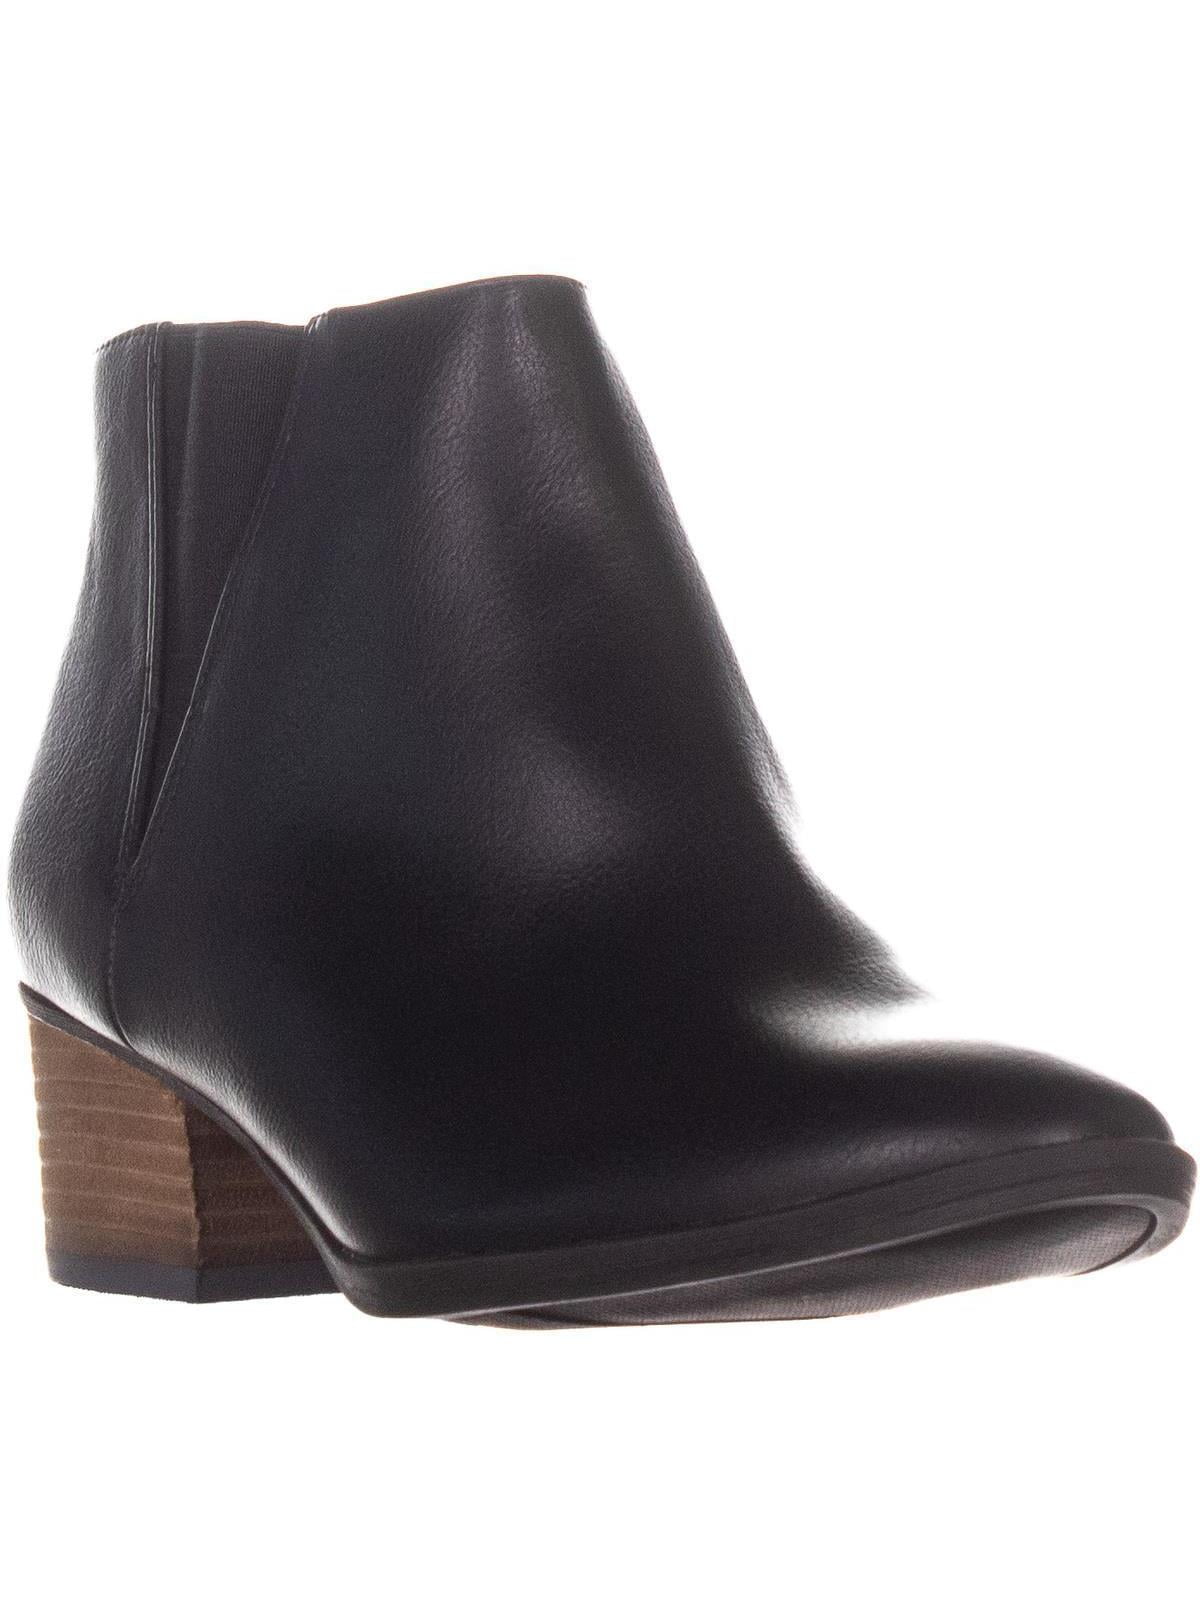 Scholls Shoes Womens Tumbler Ankle Boot Dr